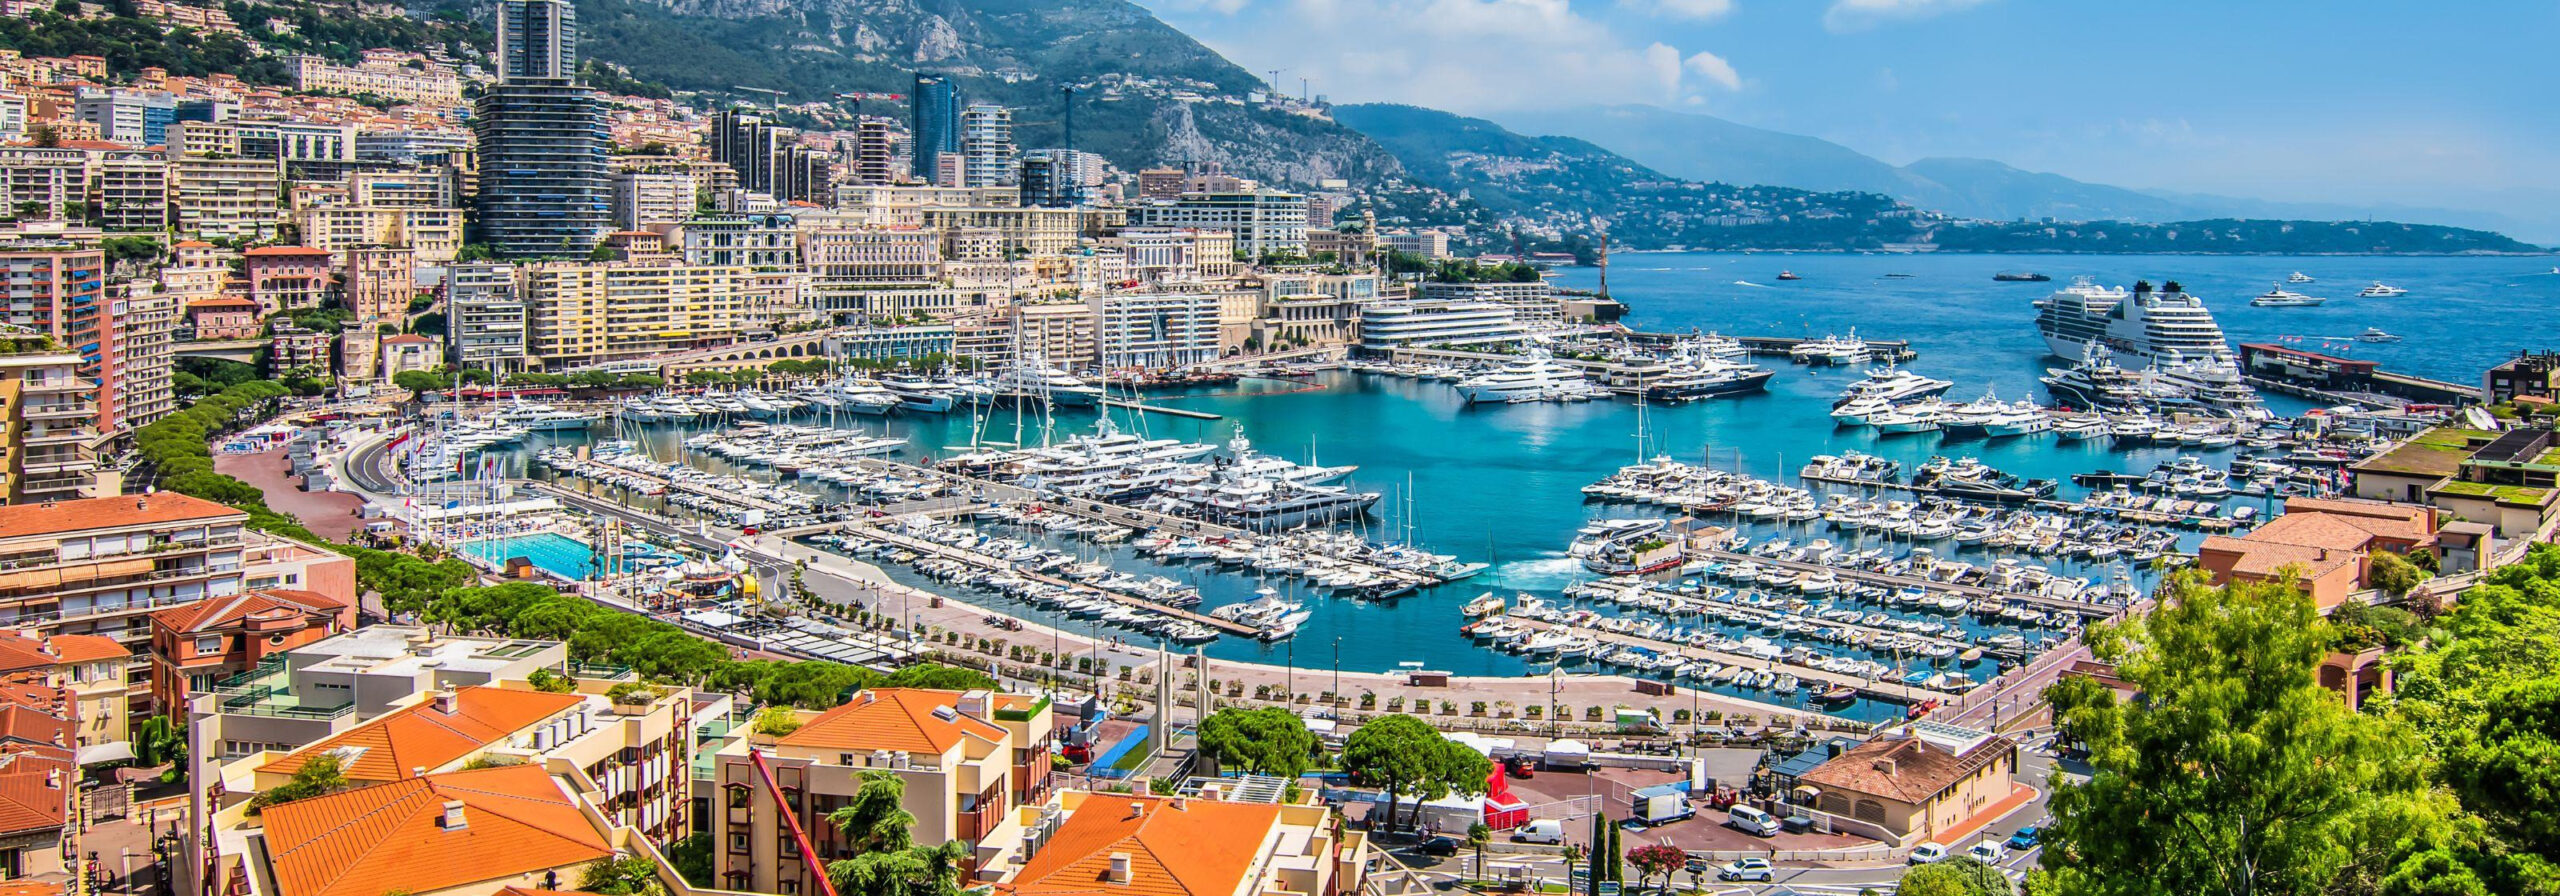 A photo of Port Hercule in Monaco. In this photo you see the skyline of Monaco with a mixture of Superyachts, Residential Buildings, Offices, Museums and more overlooking the Mediterranean sea and mountains.